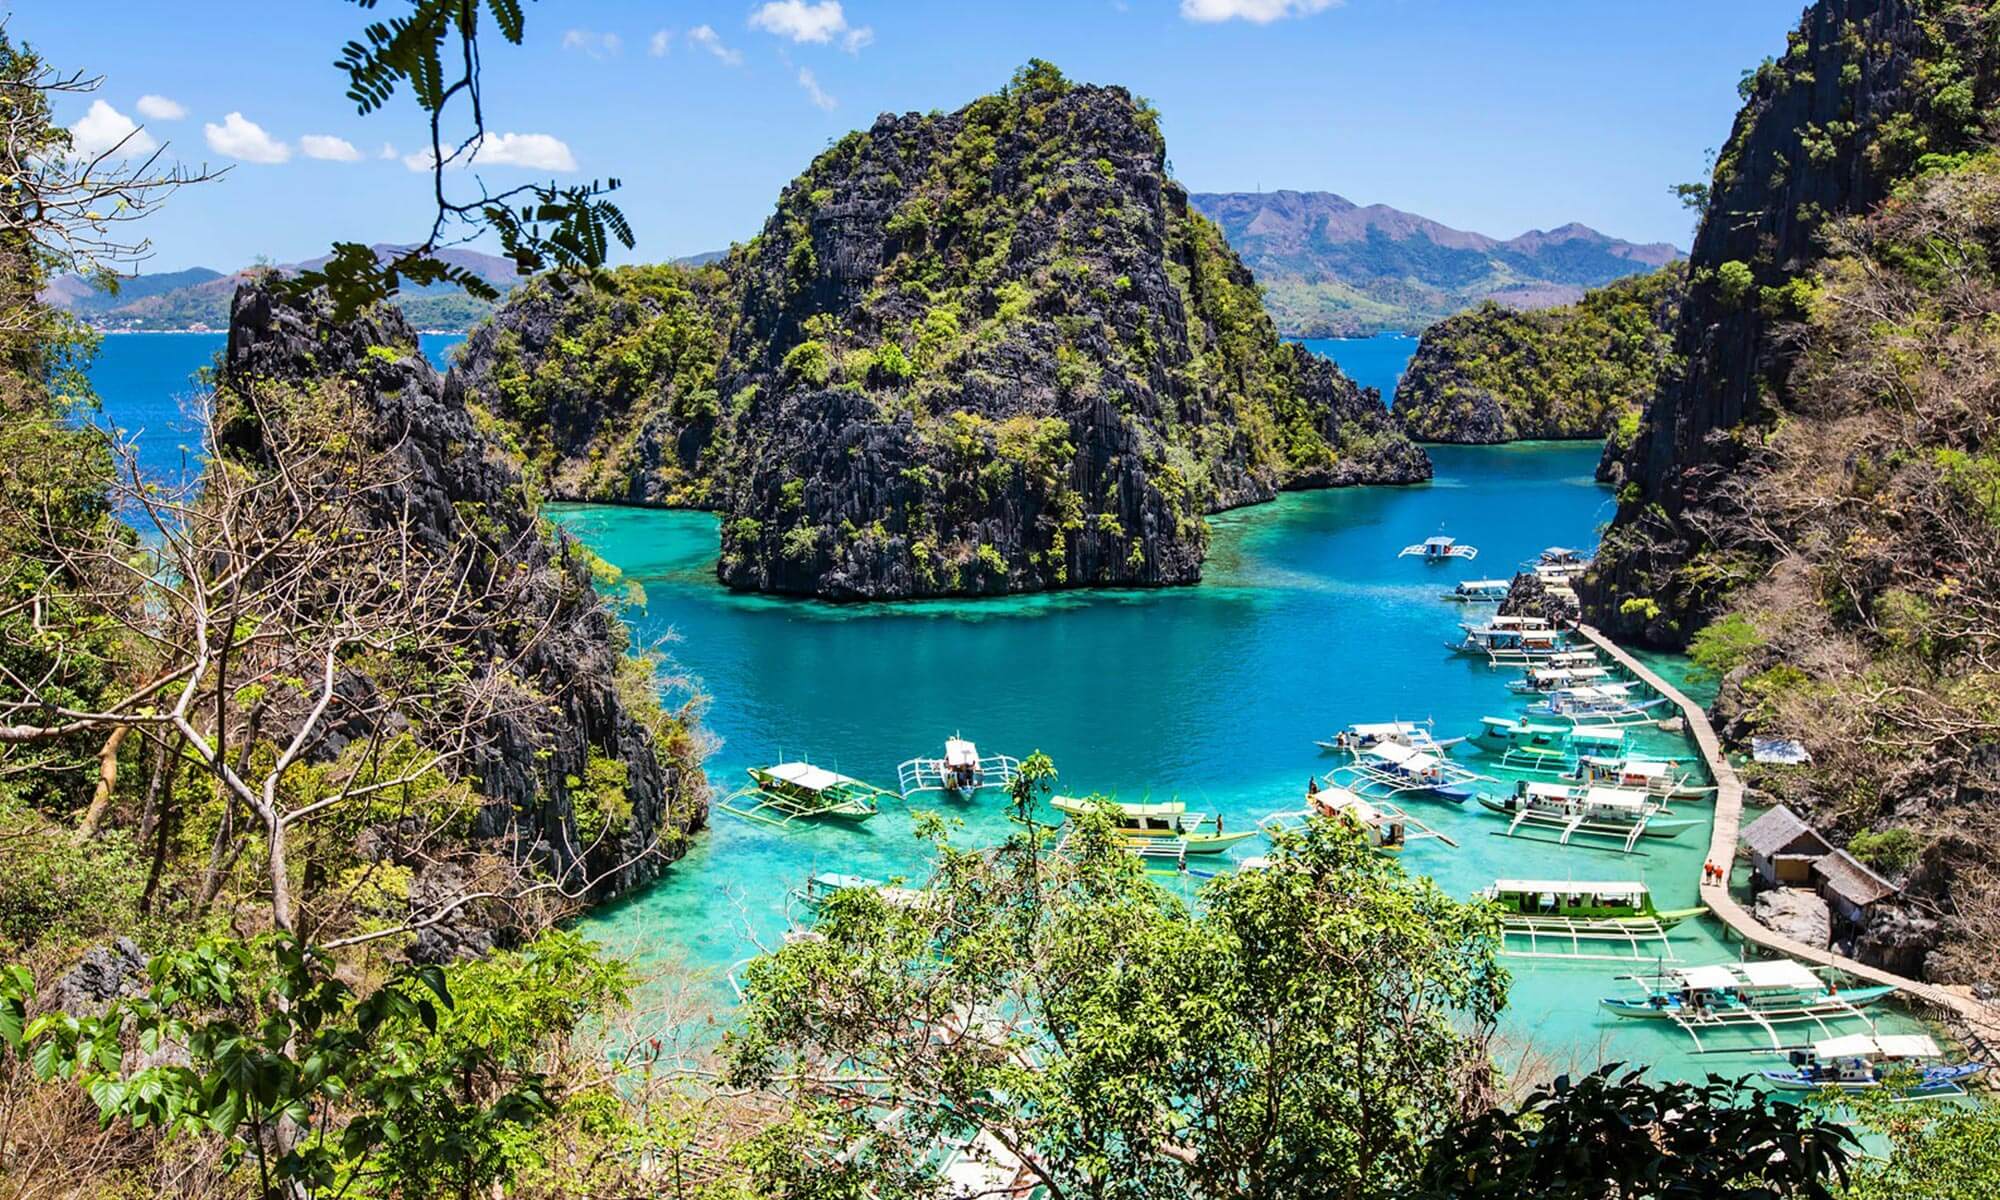 El Nido is a seaside town and popular tourist attraction in the Philippines Palawan Island